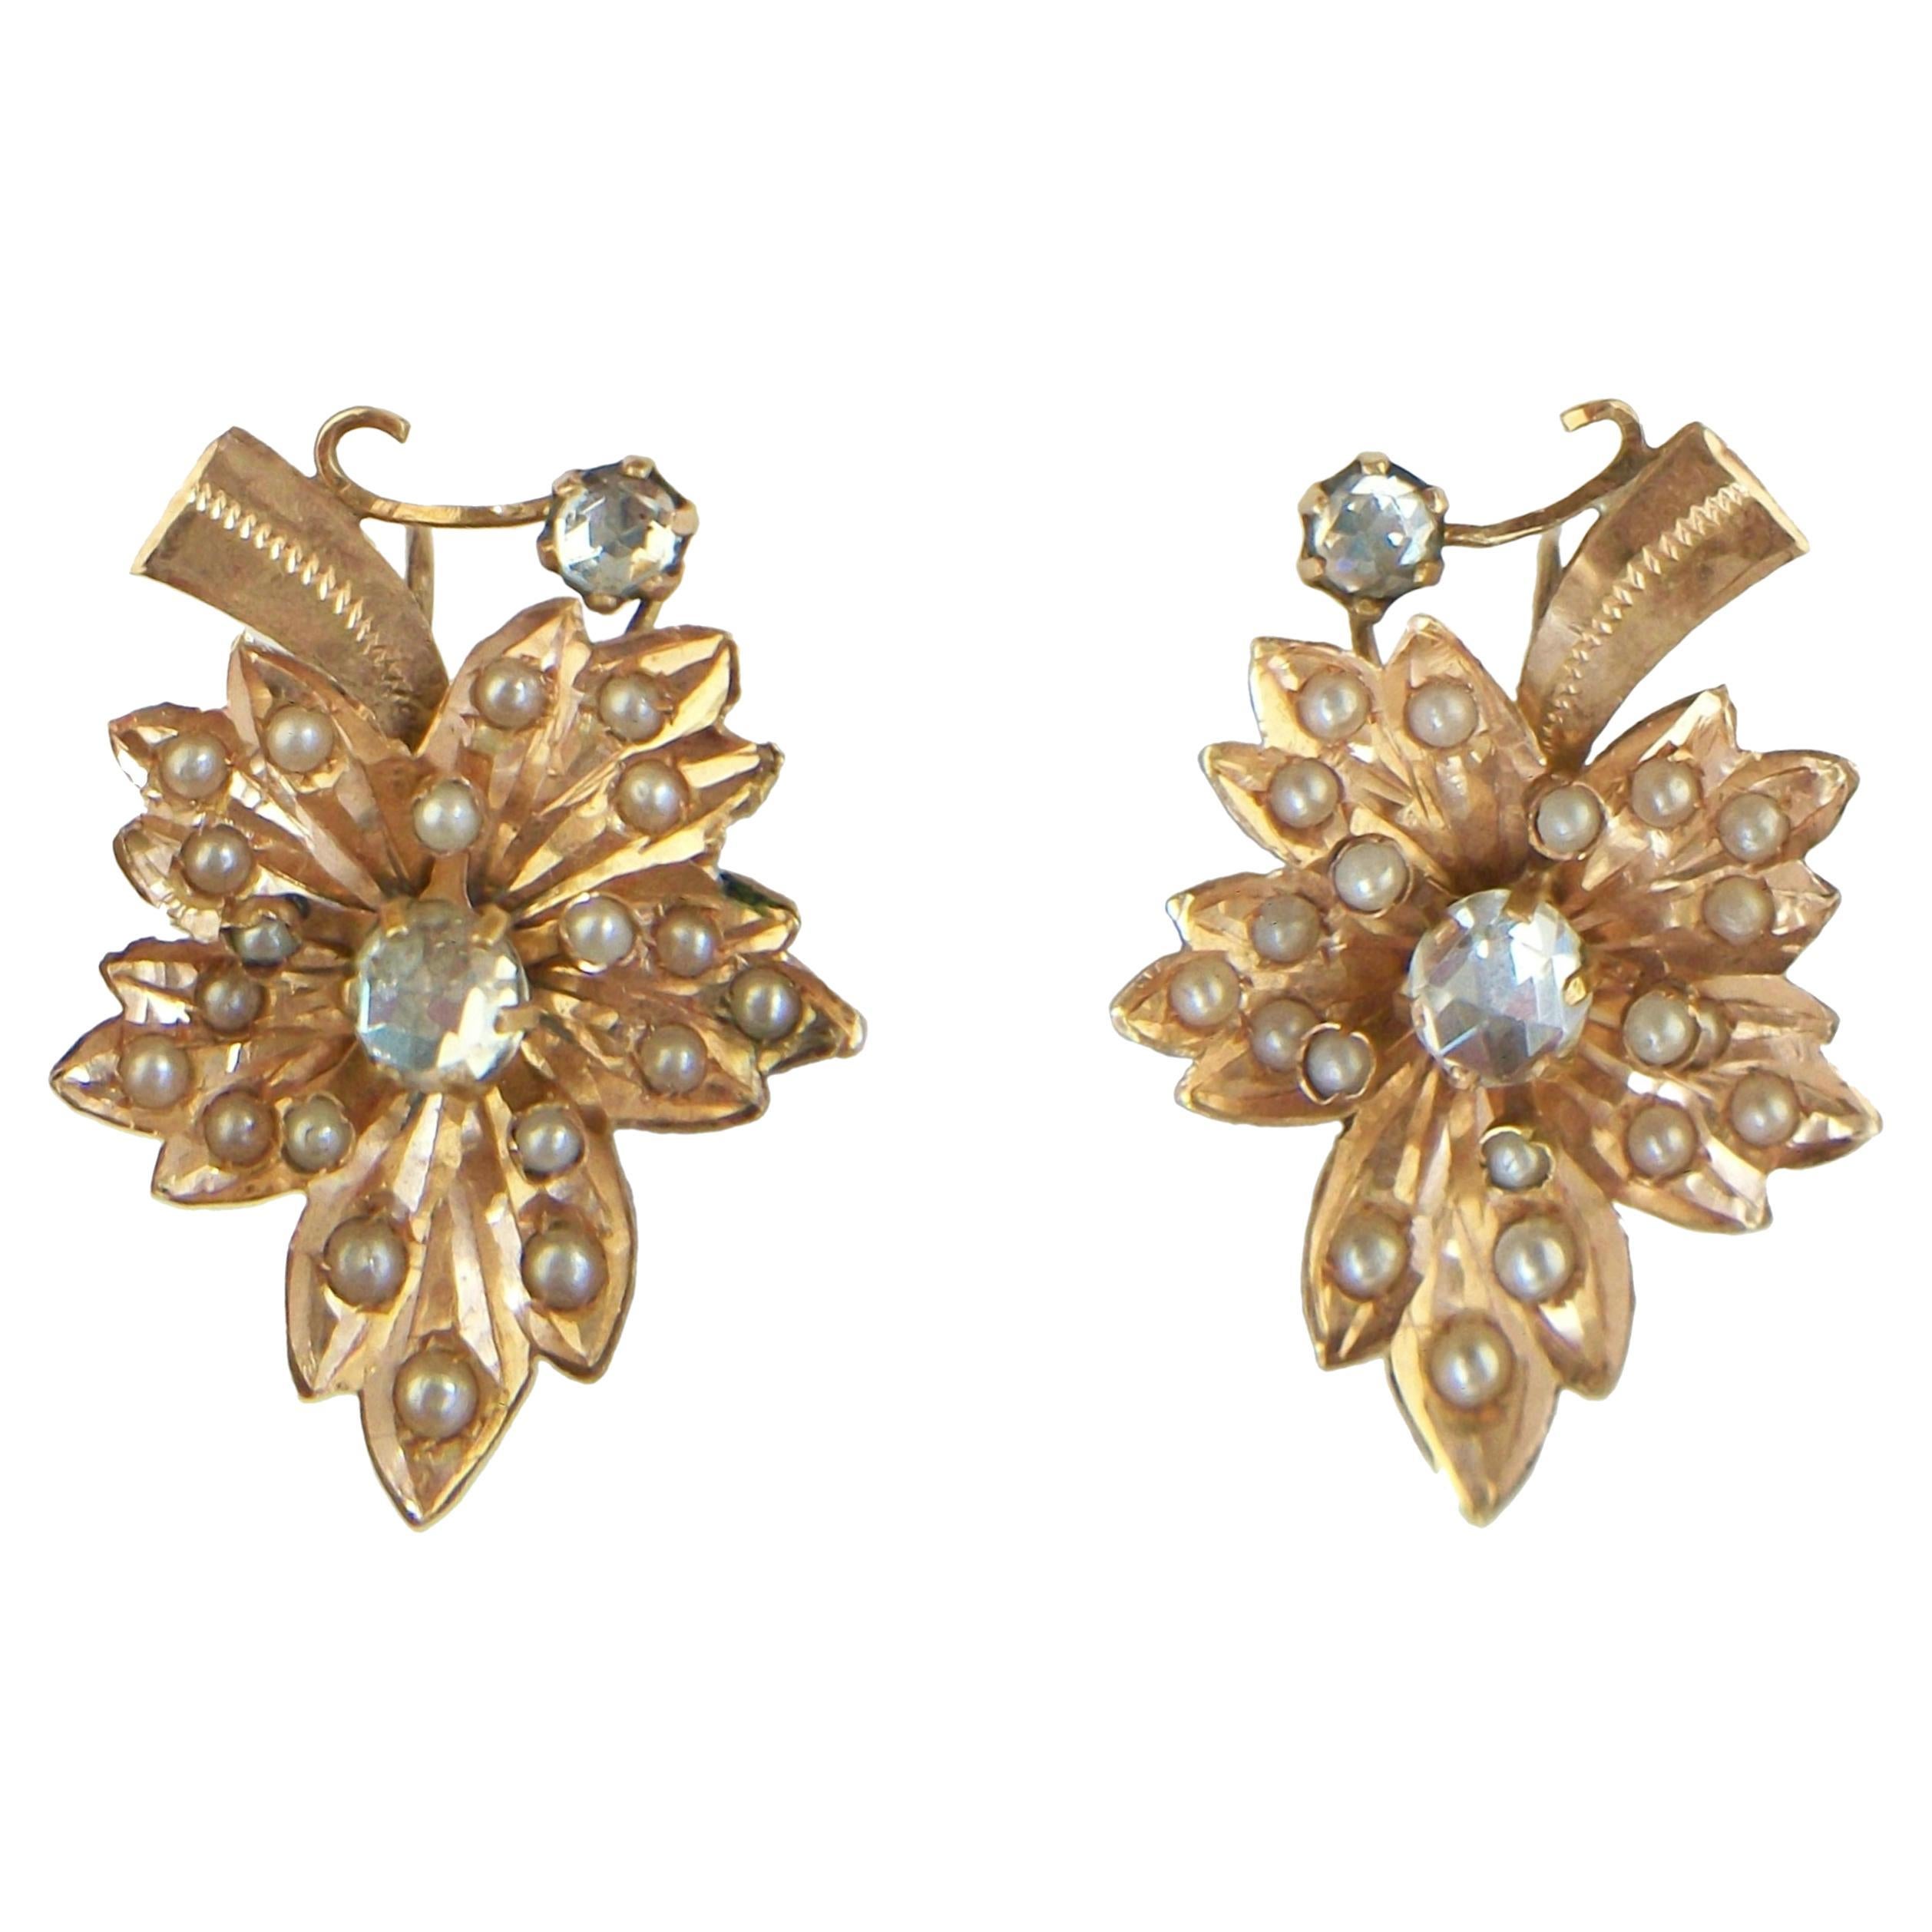 Victorian 14K Gold 'Leaf' Earrings with Seed Pearls & Paste - E.U. - Circa 1880 For Sale